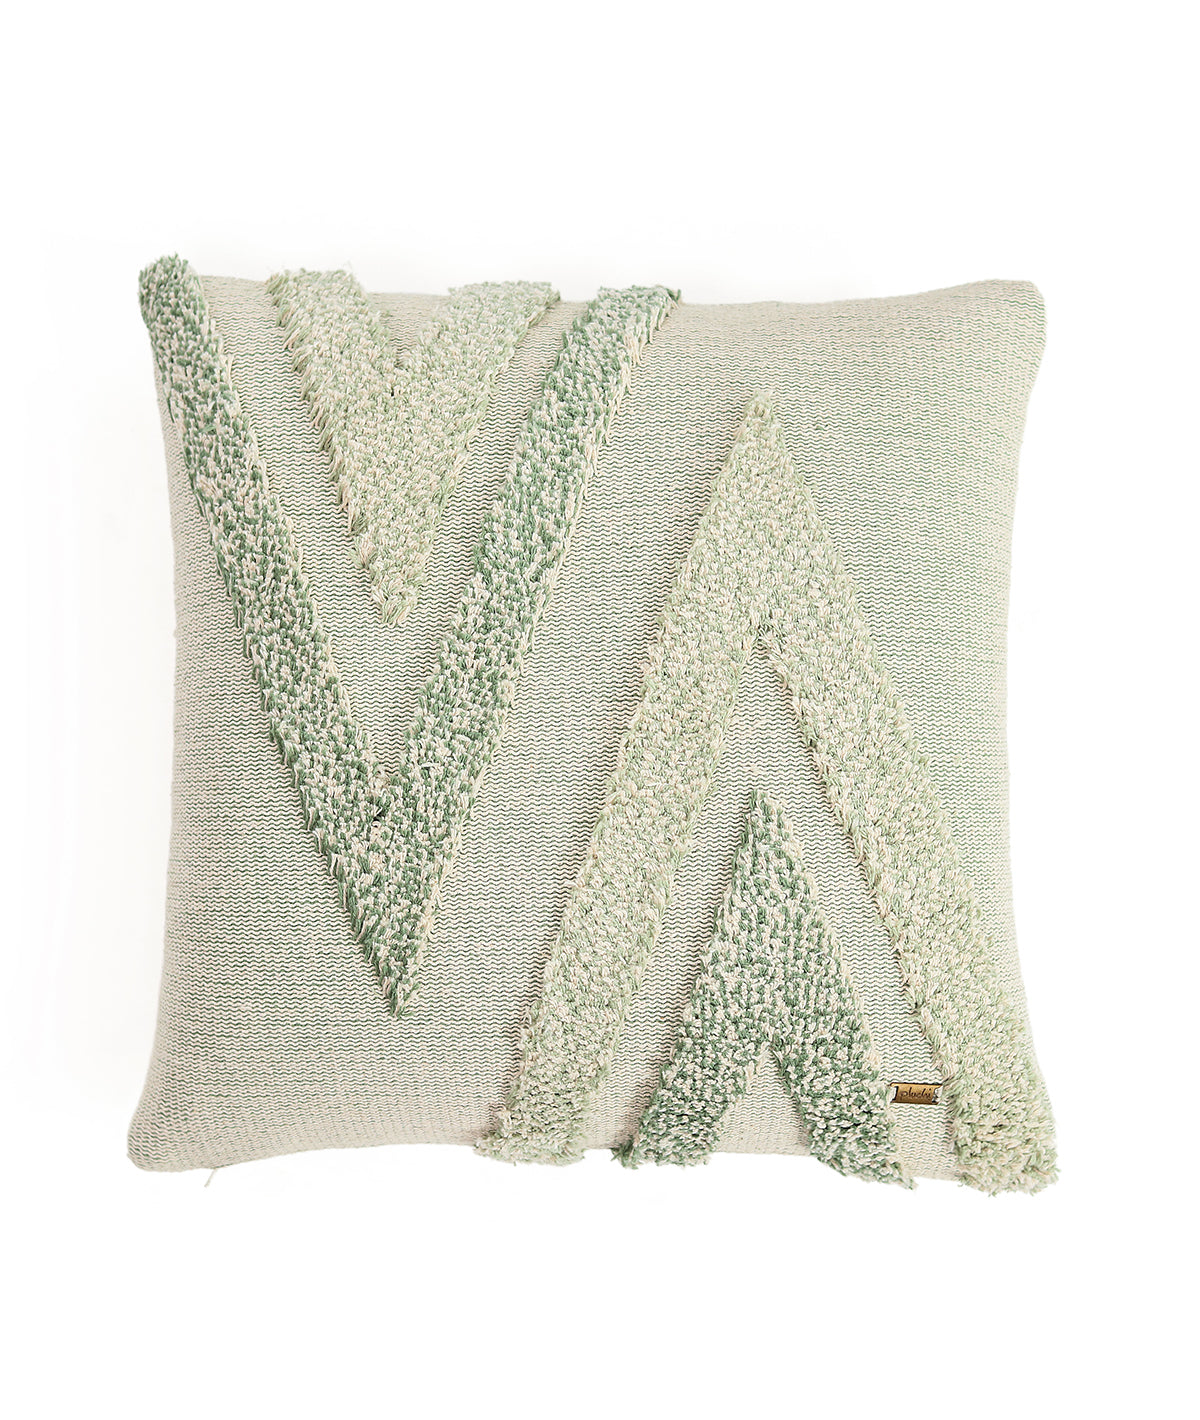 Arrowhead Cotton Knitted Decorative Tufted Cushion Cover (Green & Natural)